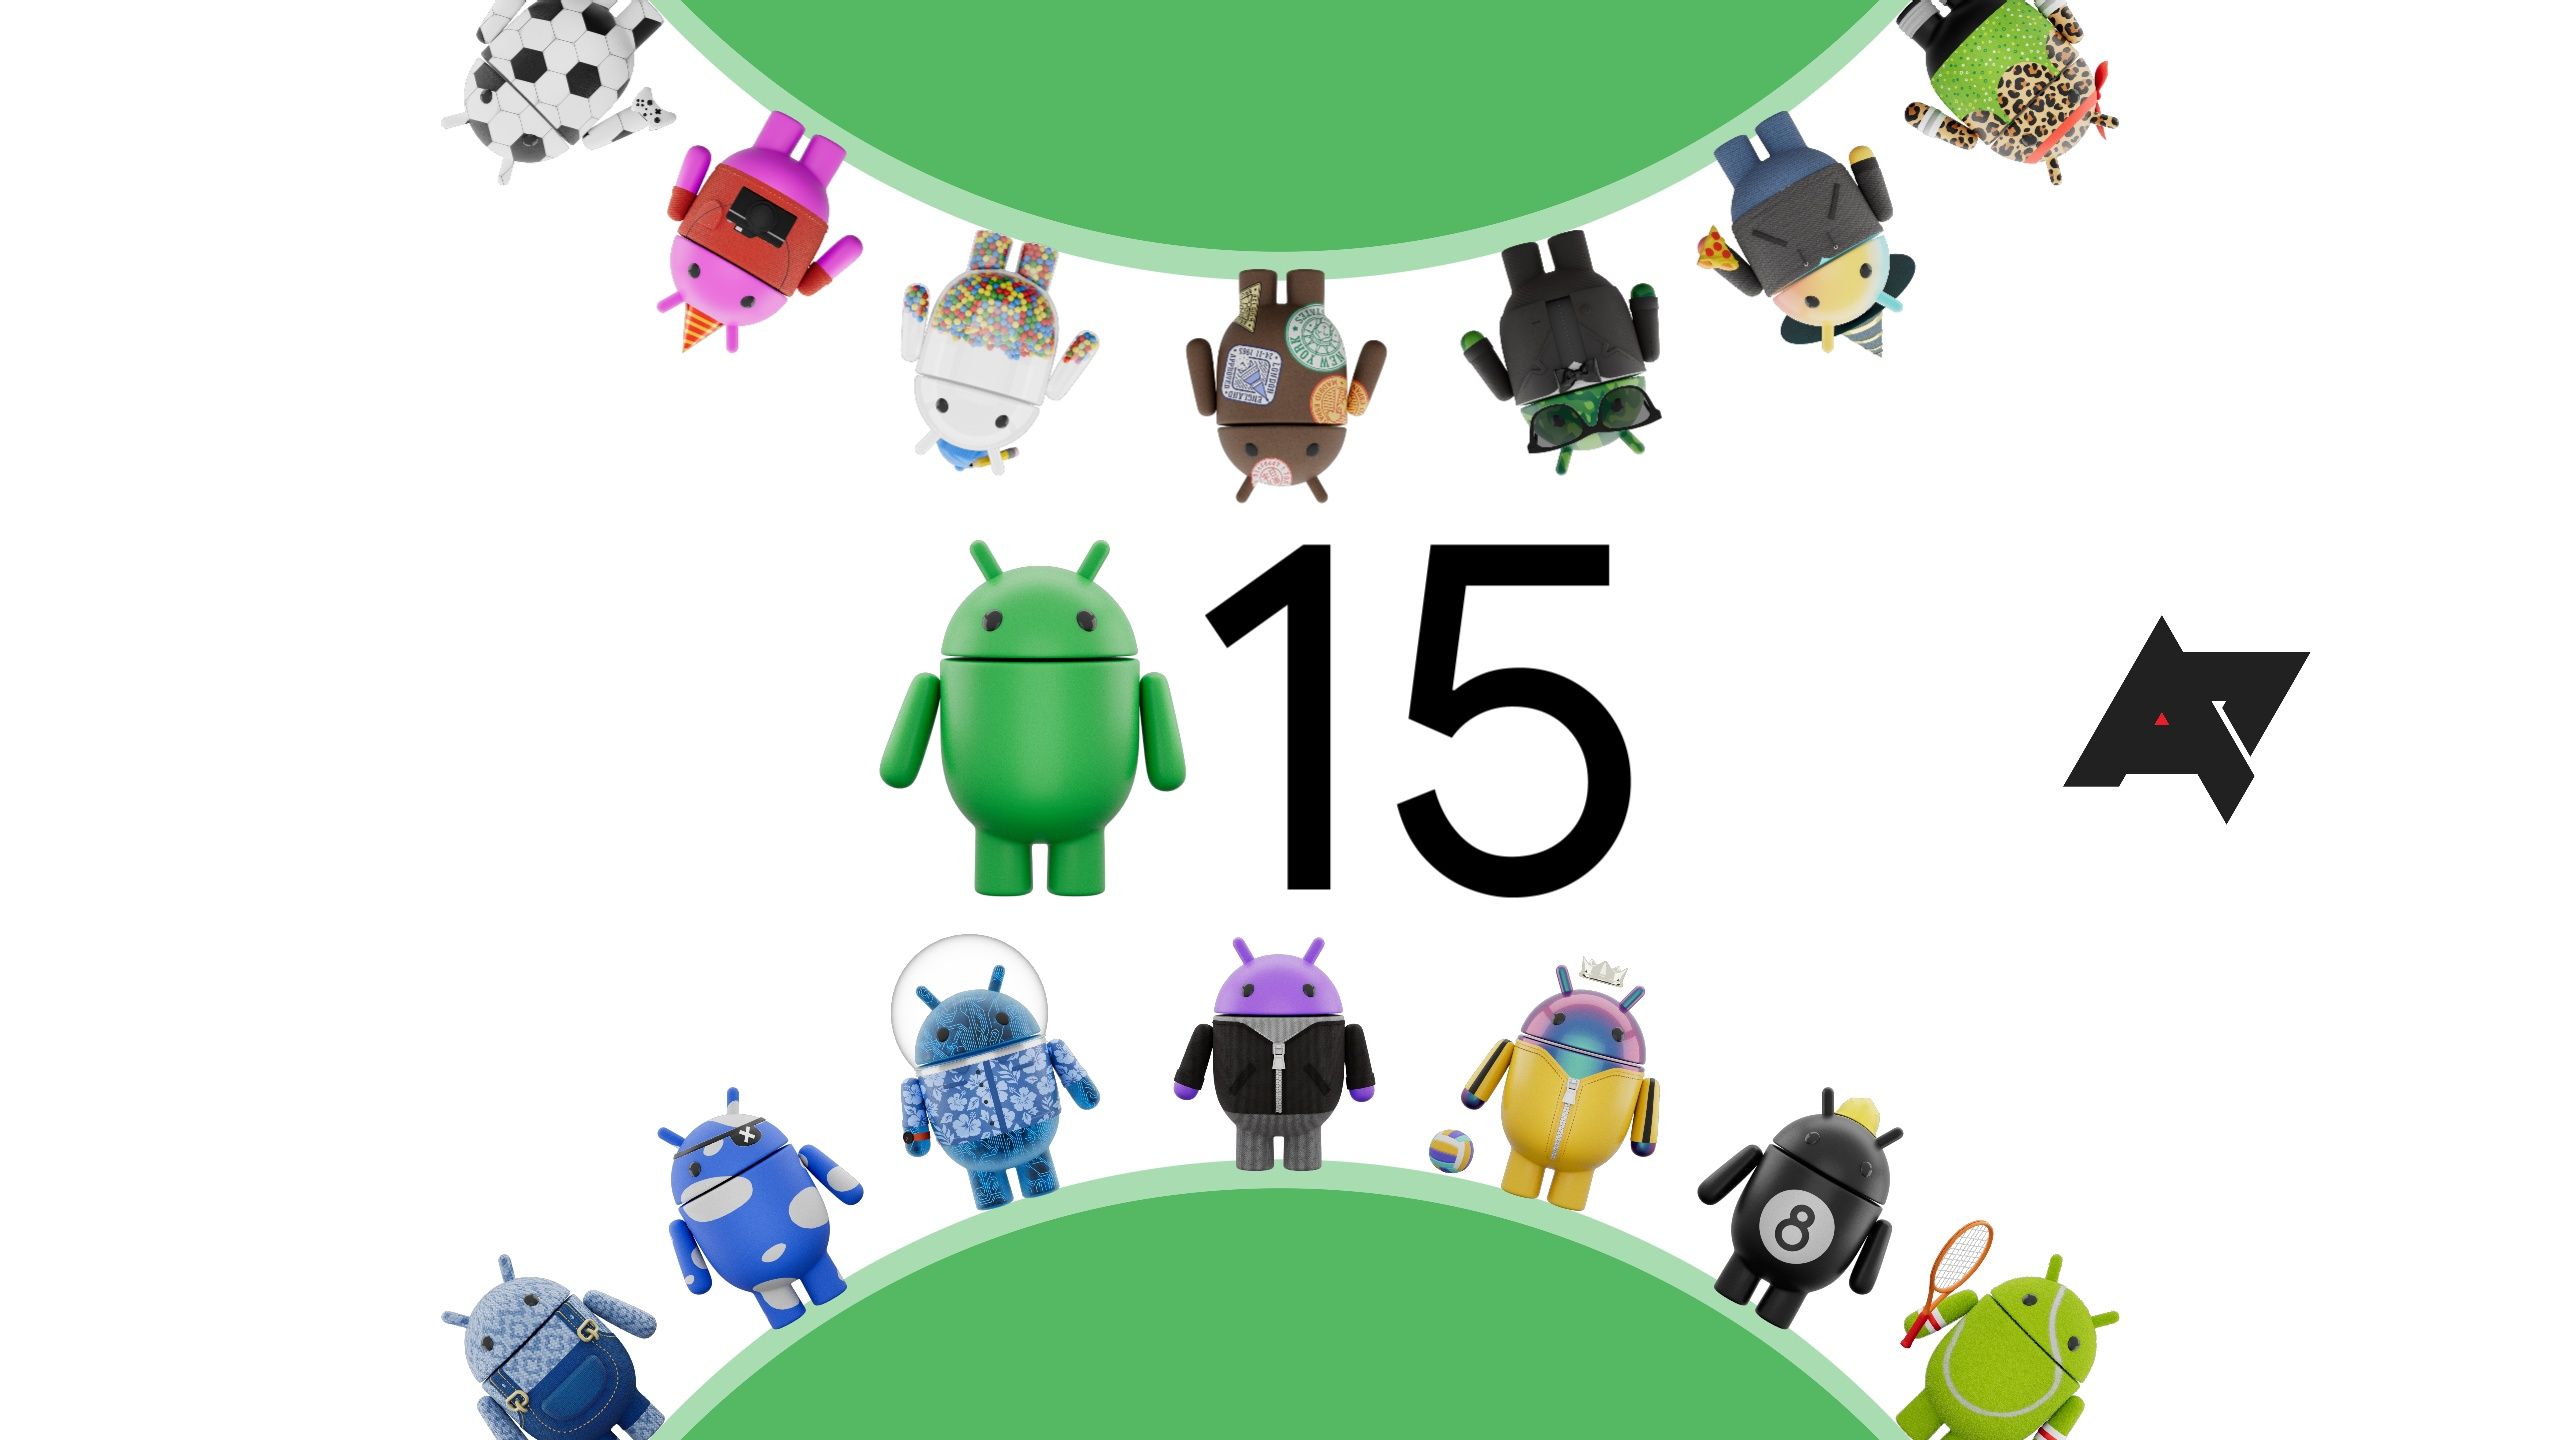 Android 15 featured image with various Android logo